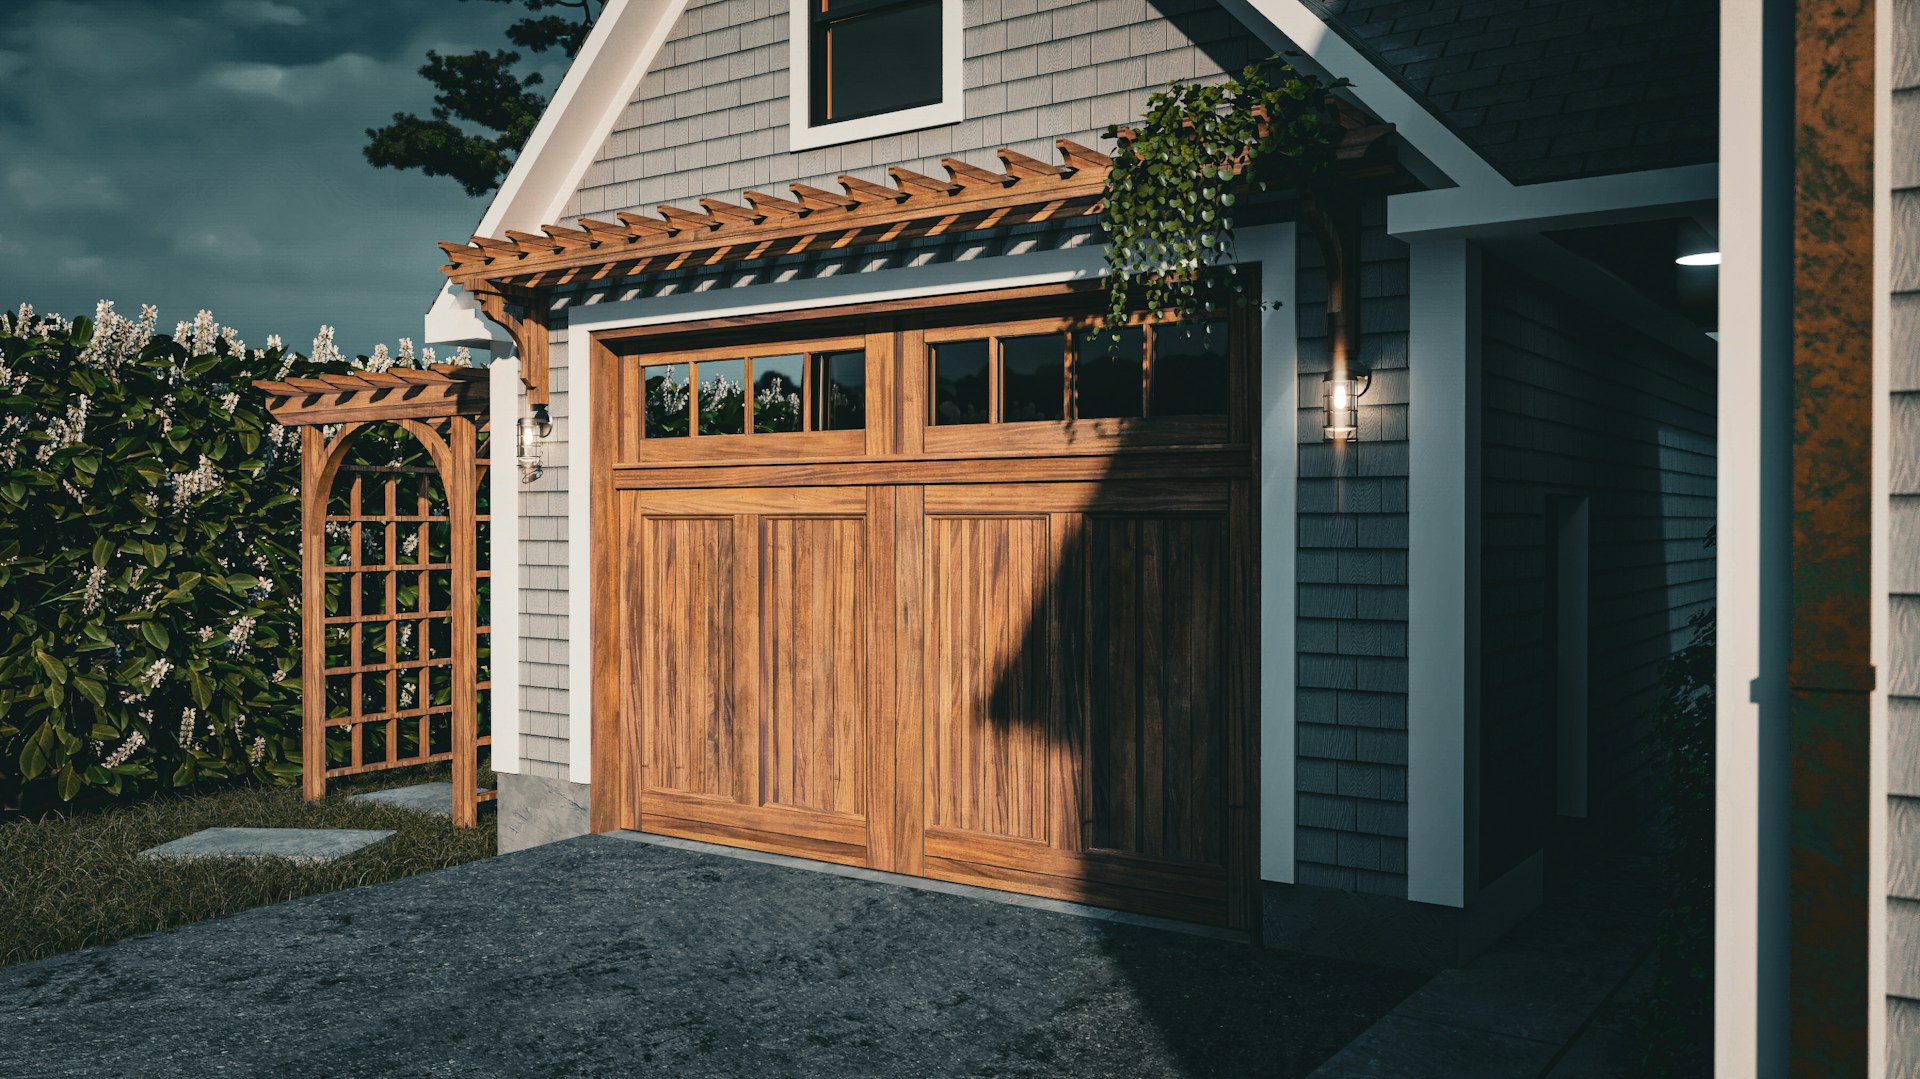 Freshening Up Home Aesthetics: The Role of Garage Doors in Curb Appeal